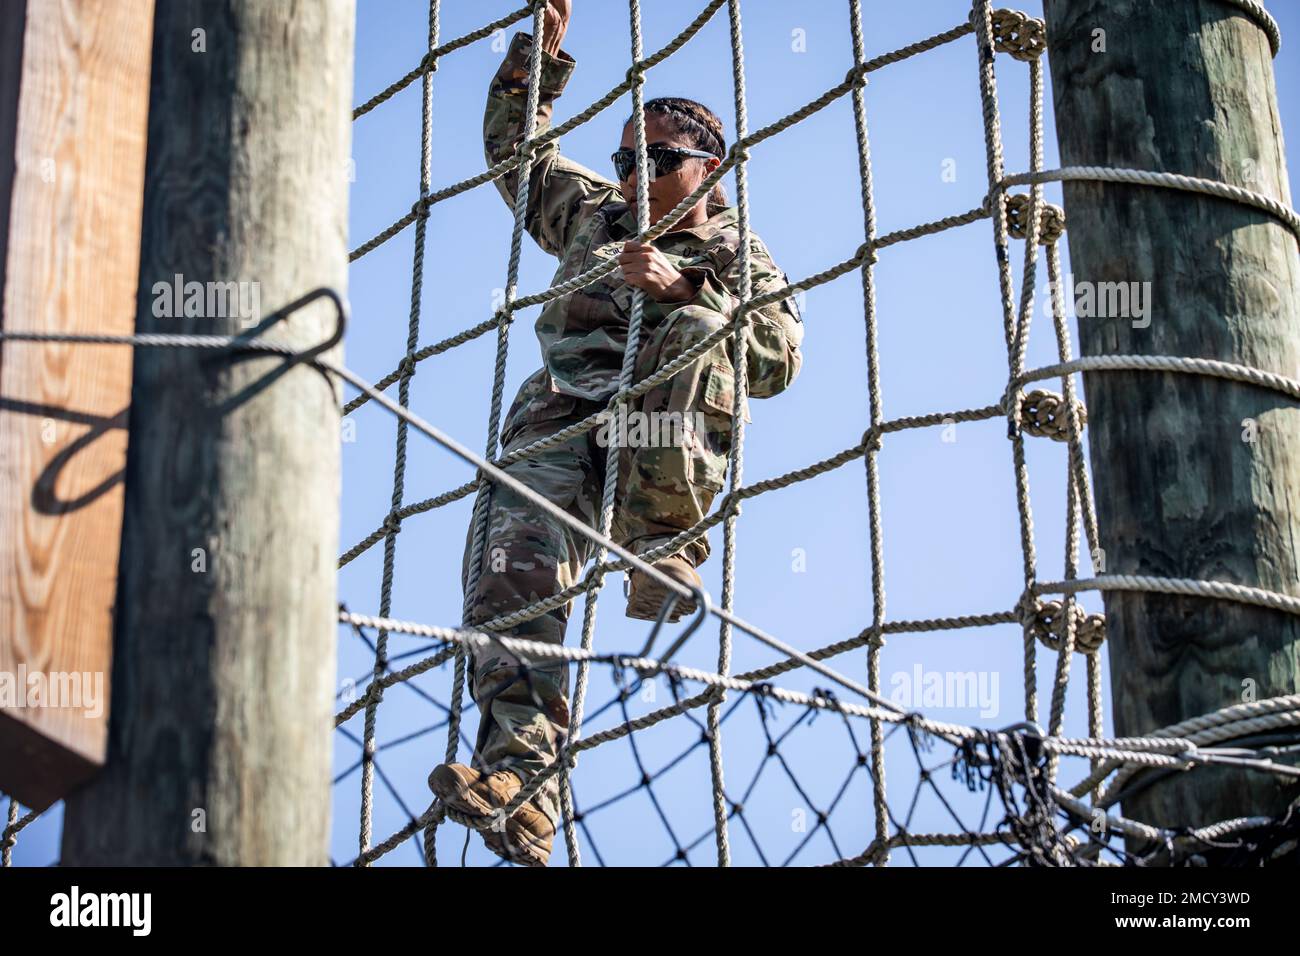 Staff Sgt. Ashley Froberg, a Soldier with 48th Chemical Brigade, pictured while navigating an obstacle course in the Best Warrior and Best Squad Competition hosted by 20th CBRNE Command at Fort Indiantown Gap, Pennsylvania, July 11, 2022. The 20th CBRNE Command’s Best Squad Competition and Best Warrior Competition is a single event used to select the best Noncommissioned Officer of the Year and Soldier of the Year from Soldiers within the command and its major subordinate commands. Stock Photo